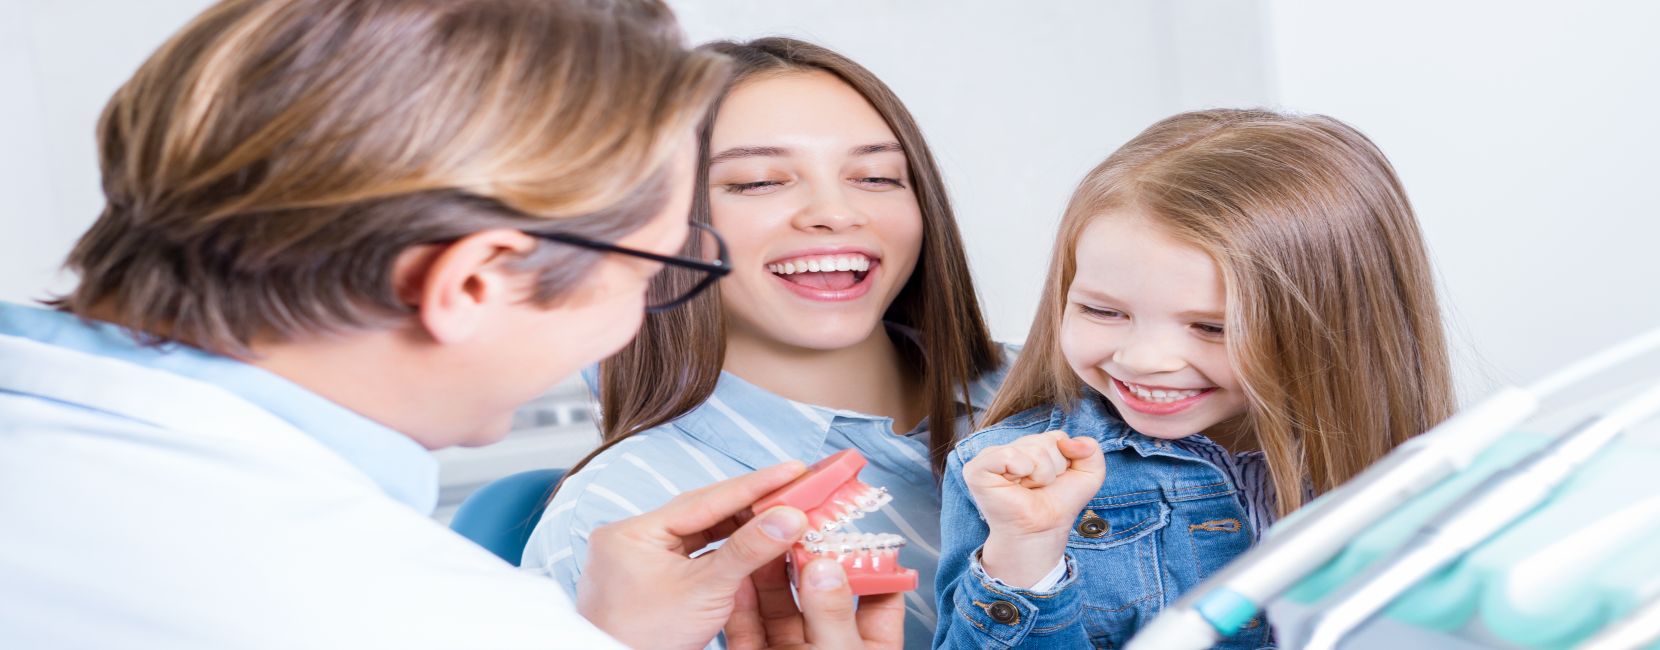 Family dentistry services provided at Millersville Family Dentistry in Millersville, MD